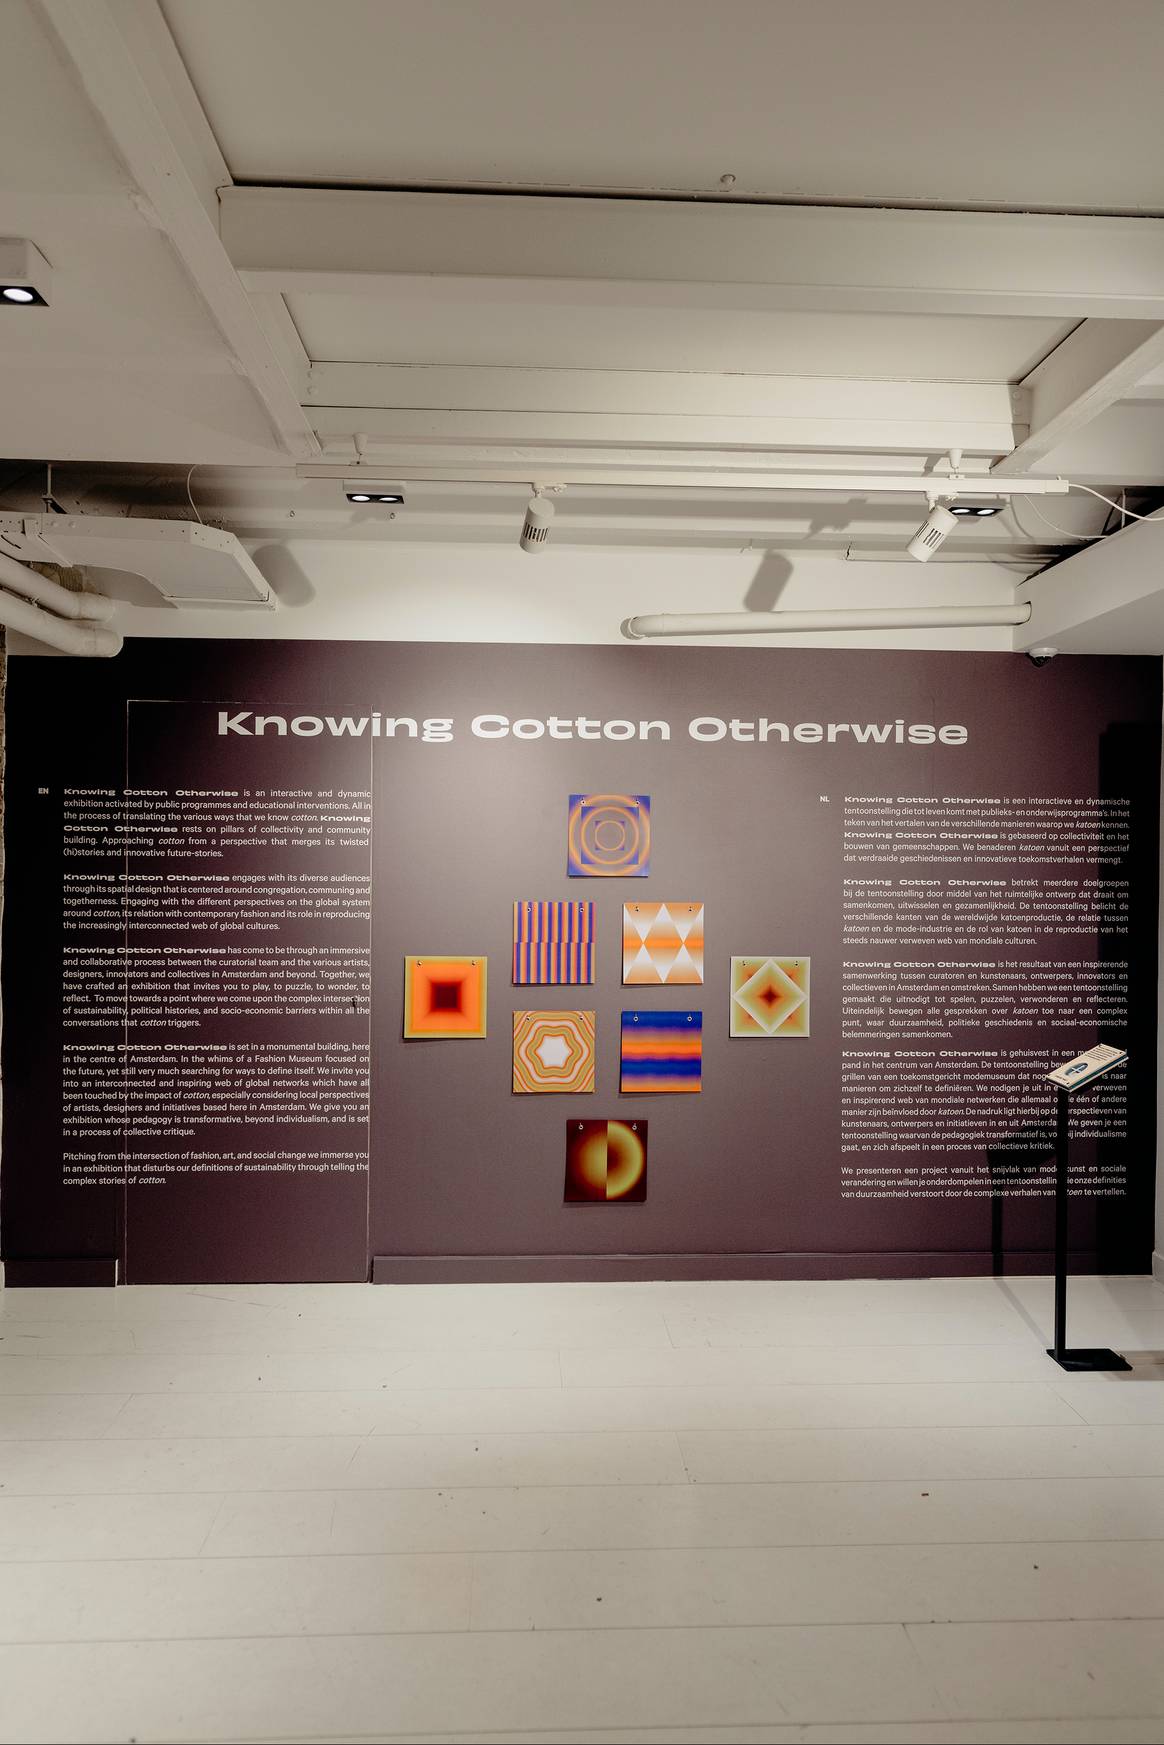 Beeld: Knowing Cotton Otherwise in Fashion for Good Museum. Foto door Lorenzo de Wit